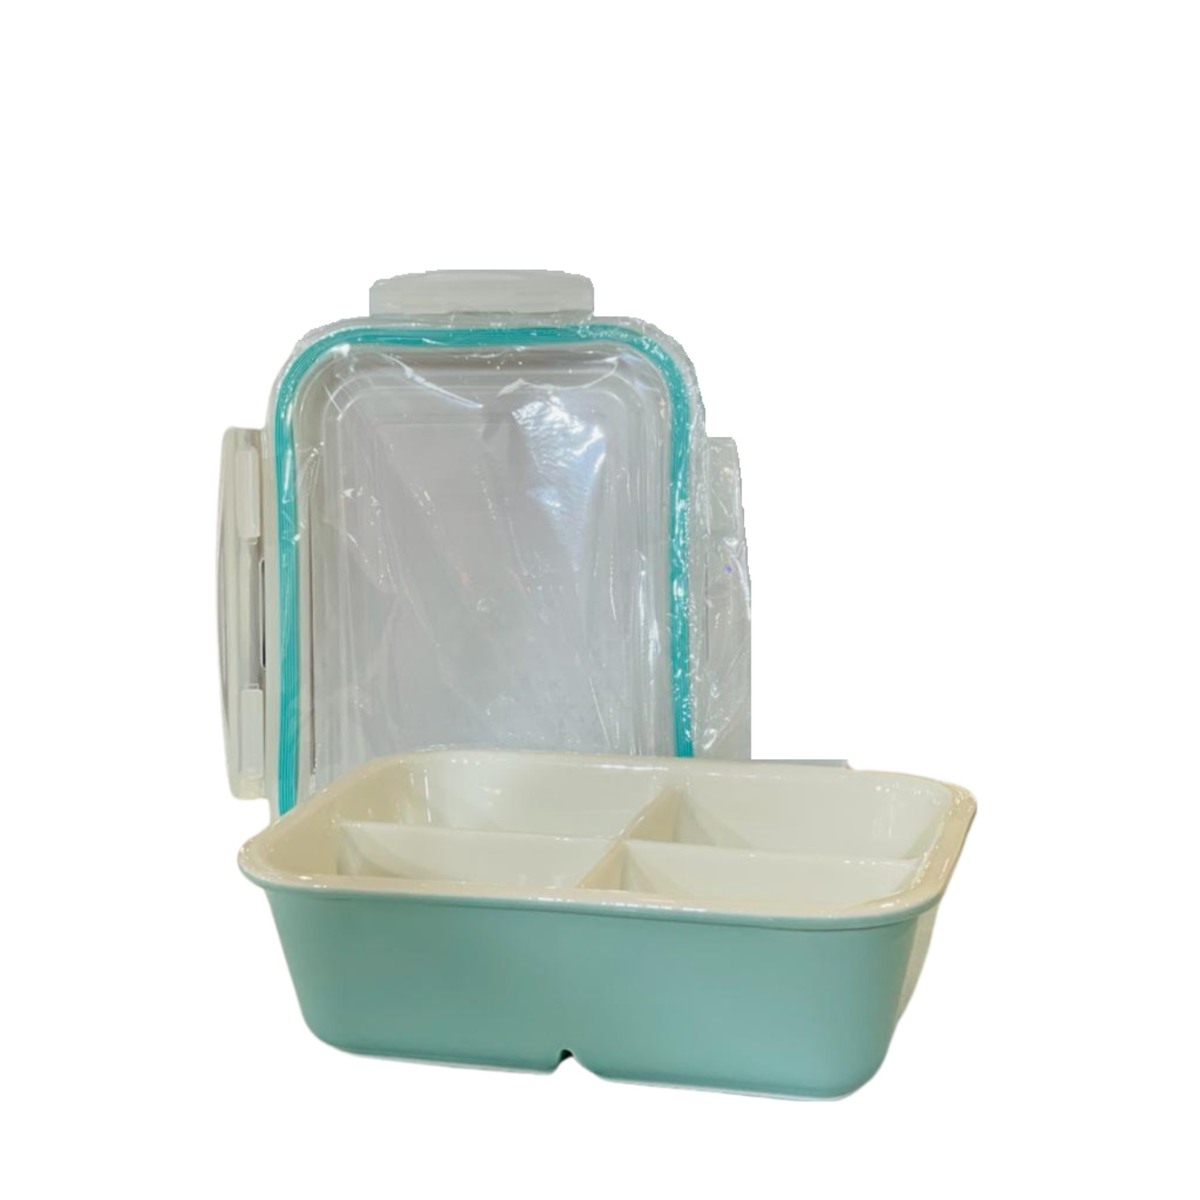 Home Ceramic Food Box With Lid 7.85 Inch 2040STK